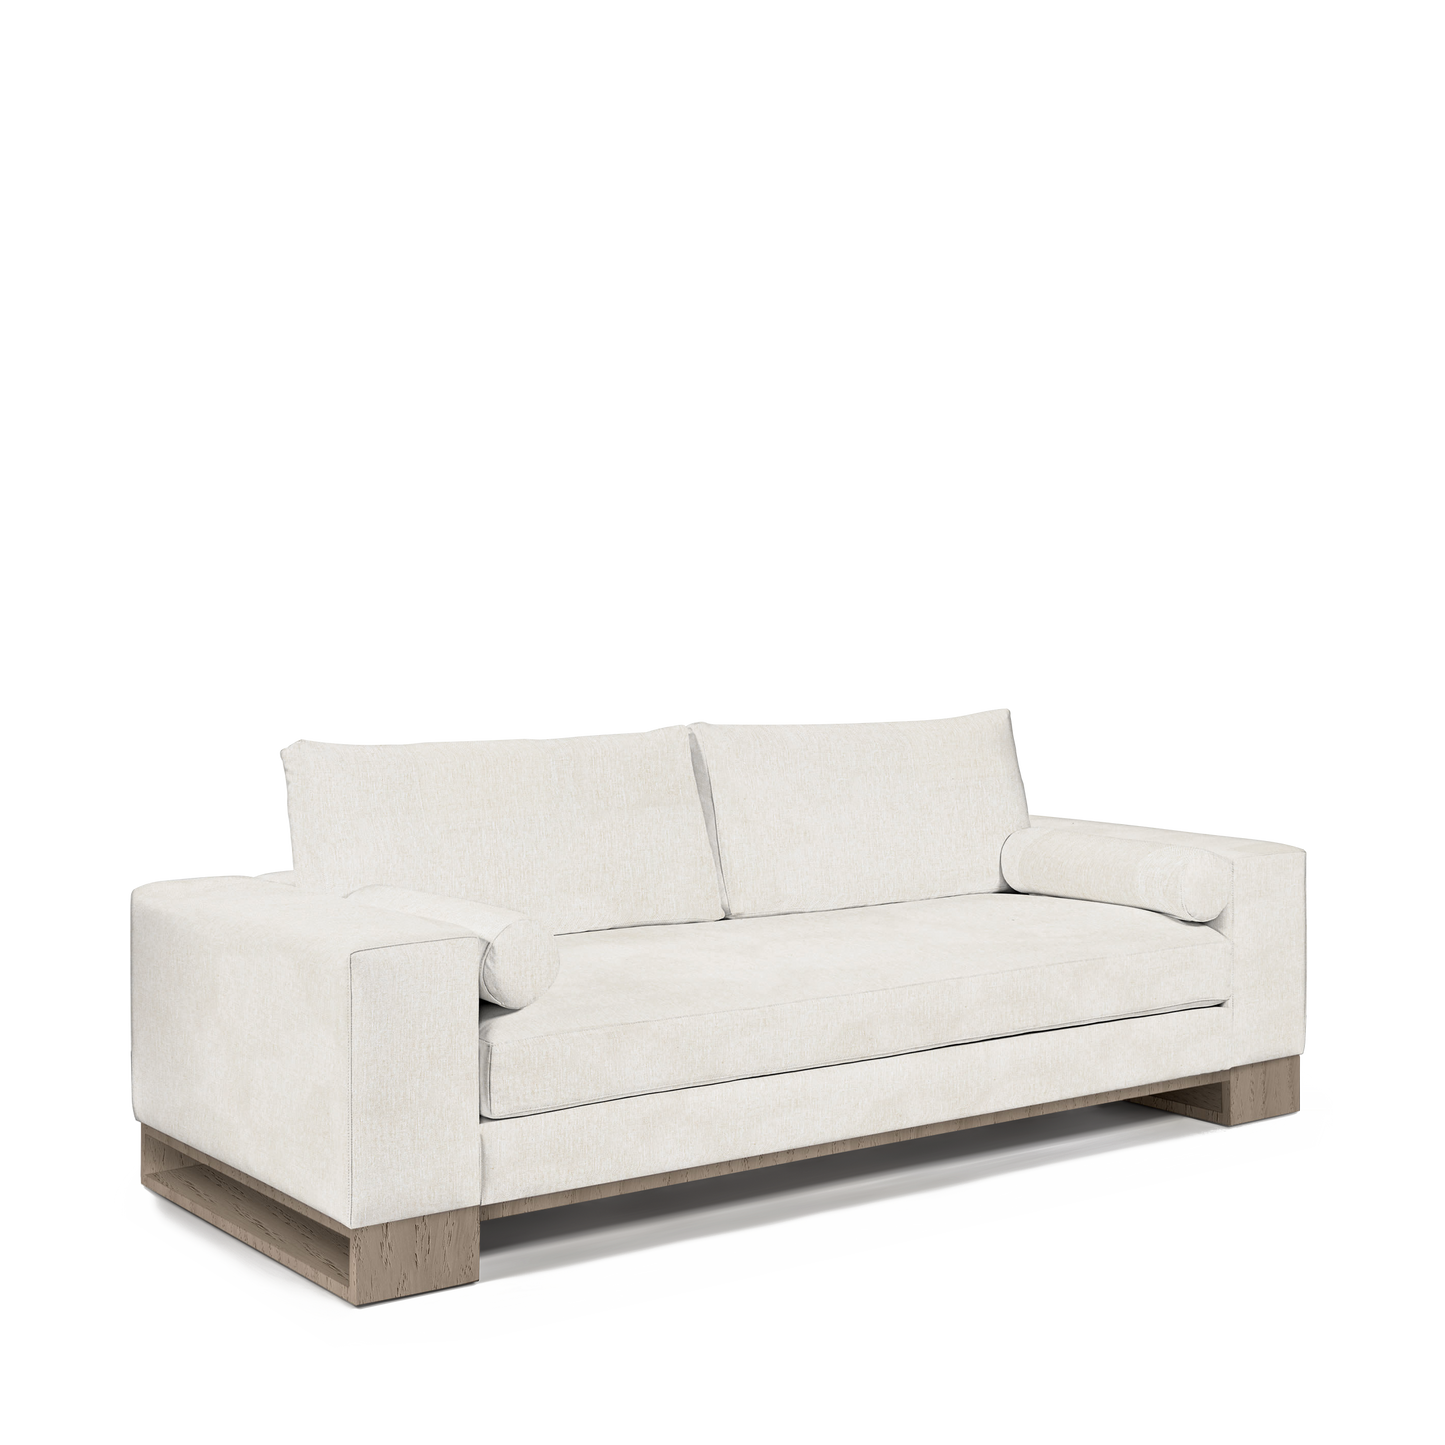 TERRA 2,5-seater sofa with bolt white textile and natural grey wood legs 